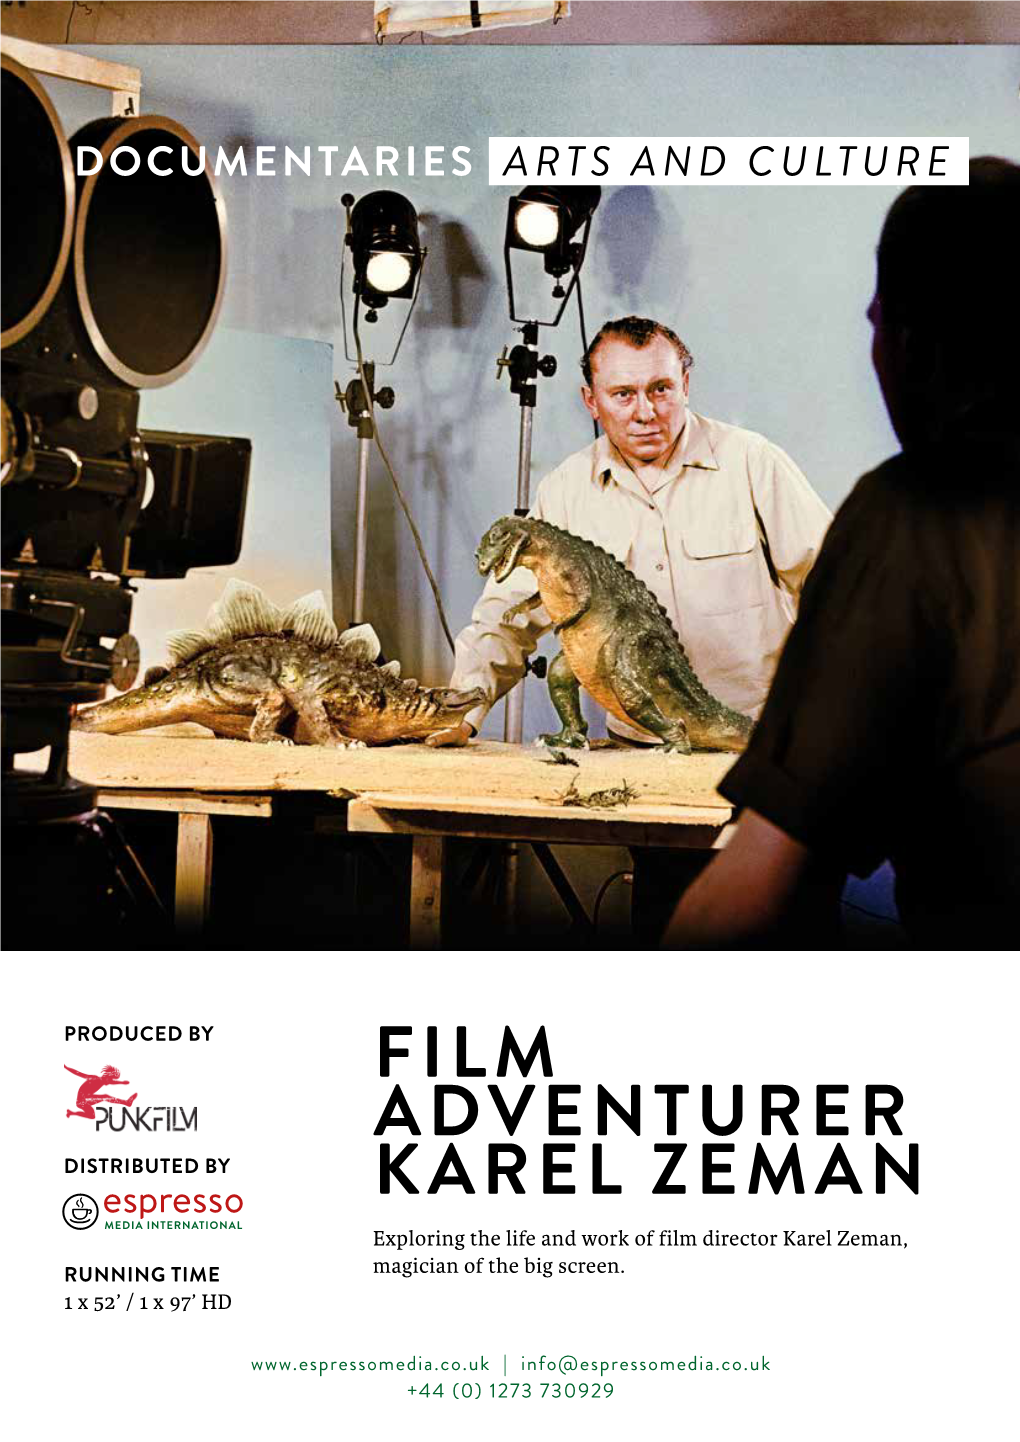 Film Adventurer Karel Zeman Is a Biographical Film That Looks Back at the Life, Work and Significance of a True Genius of World Cinema